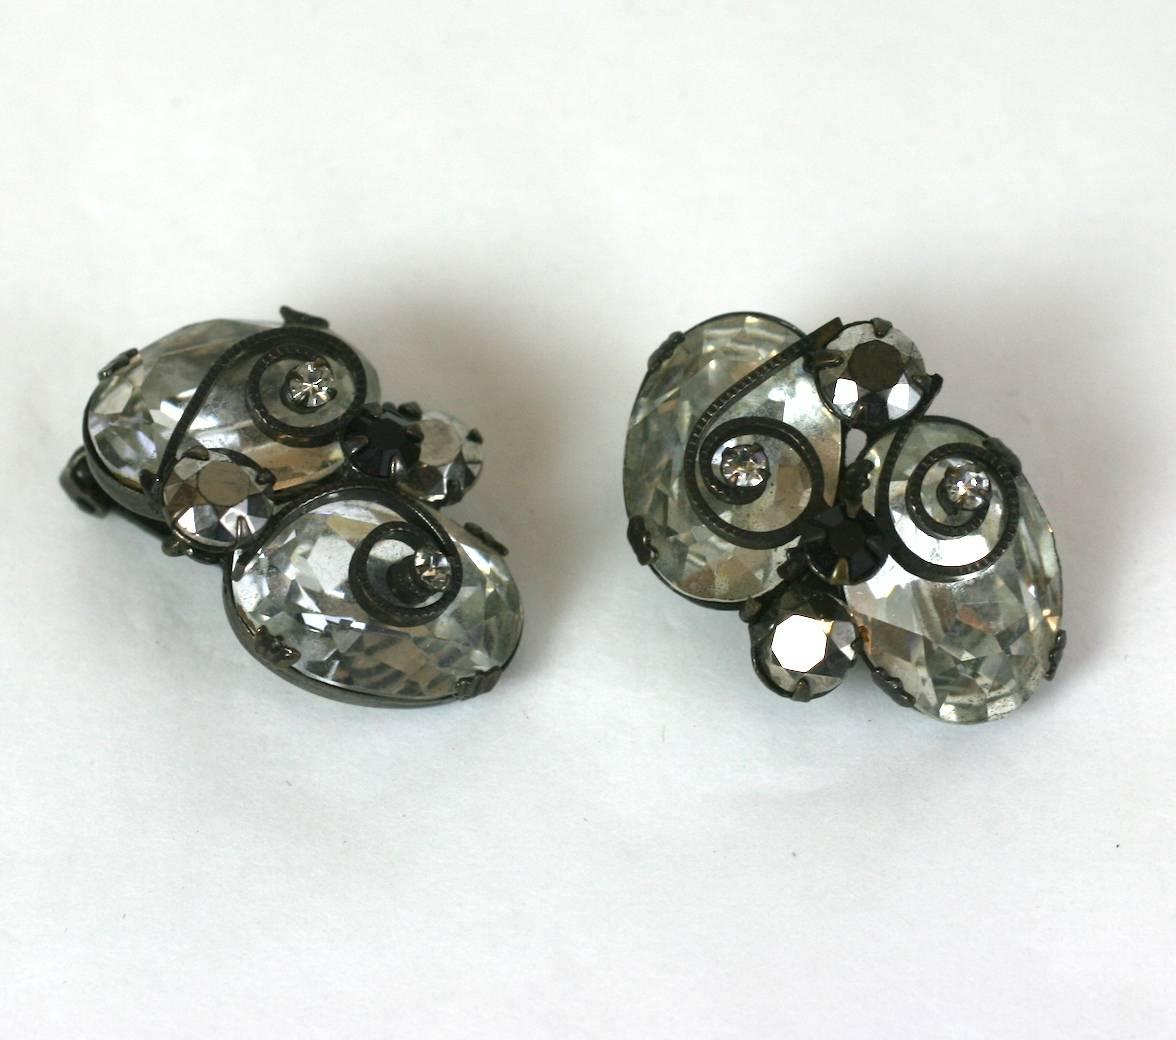 Striking Schreiner crystal ear clips with hematite and jet stone accents. Stones are set into japanned metal which provides a striking contrast. Scrolled metal accents are overlaid like French iron work. These clip earrings are unsigned. 1950's USA.